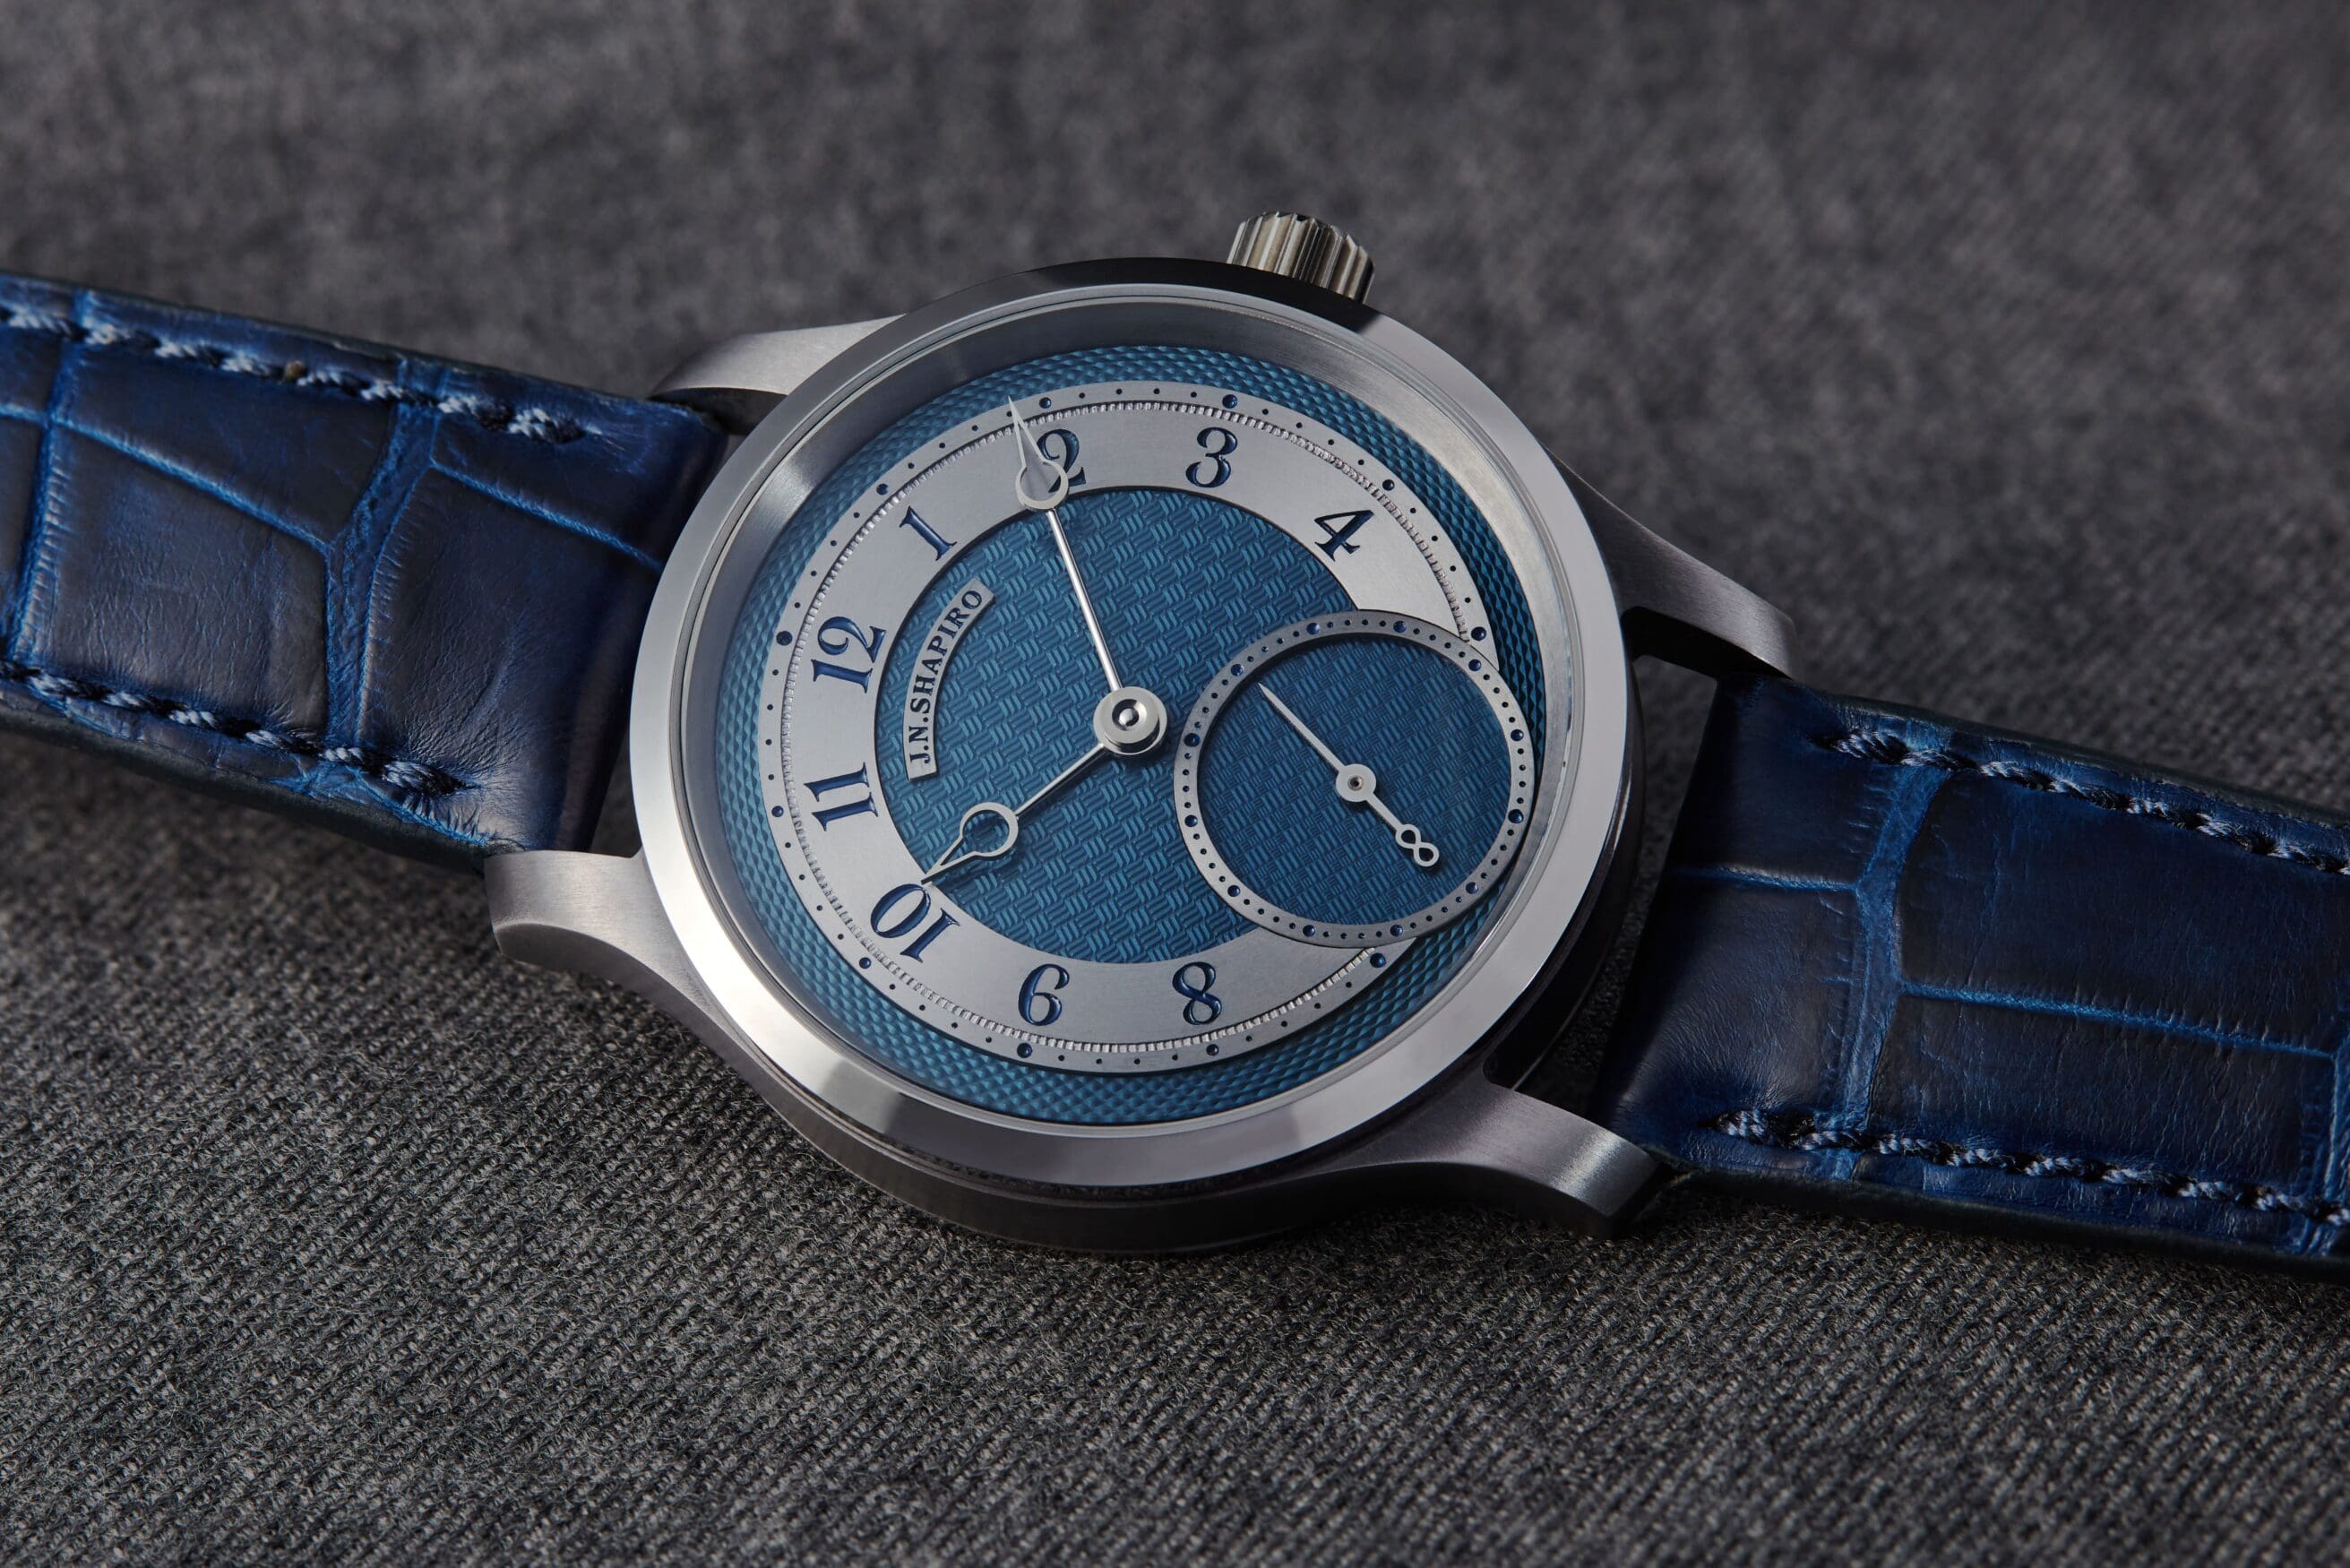 The J.N. Shapiro Infinity Tantalum Limited Edition marks the first tantalum case made in-house outside of Switzerland